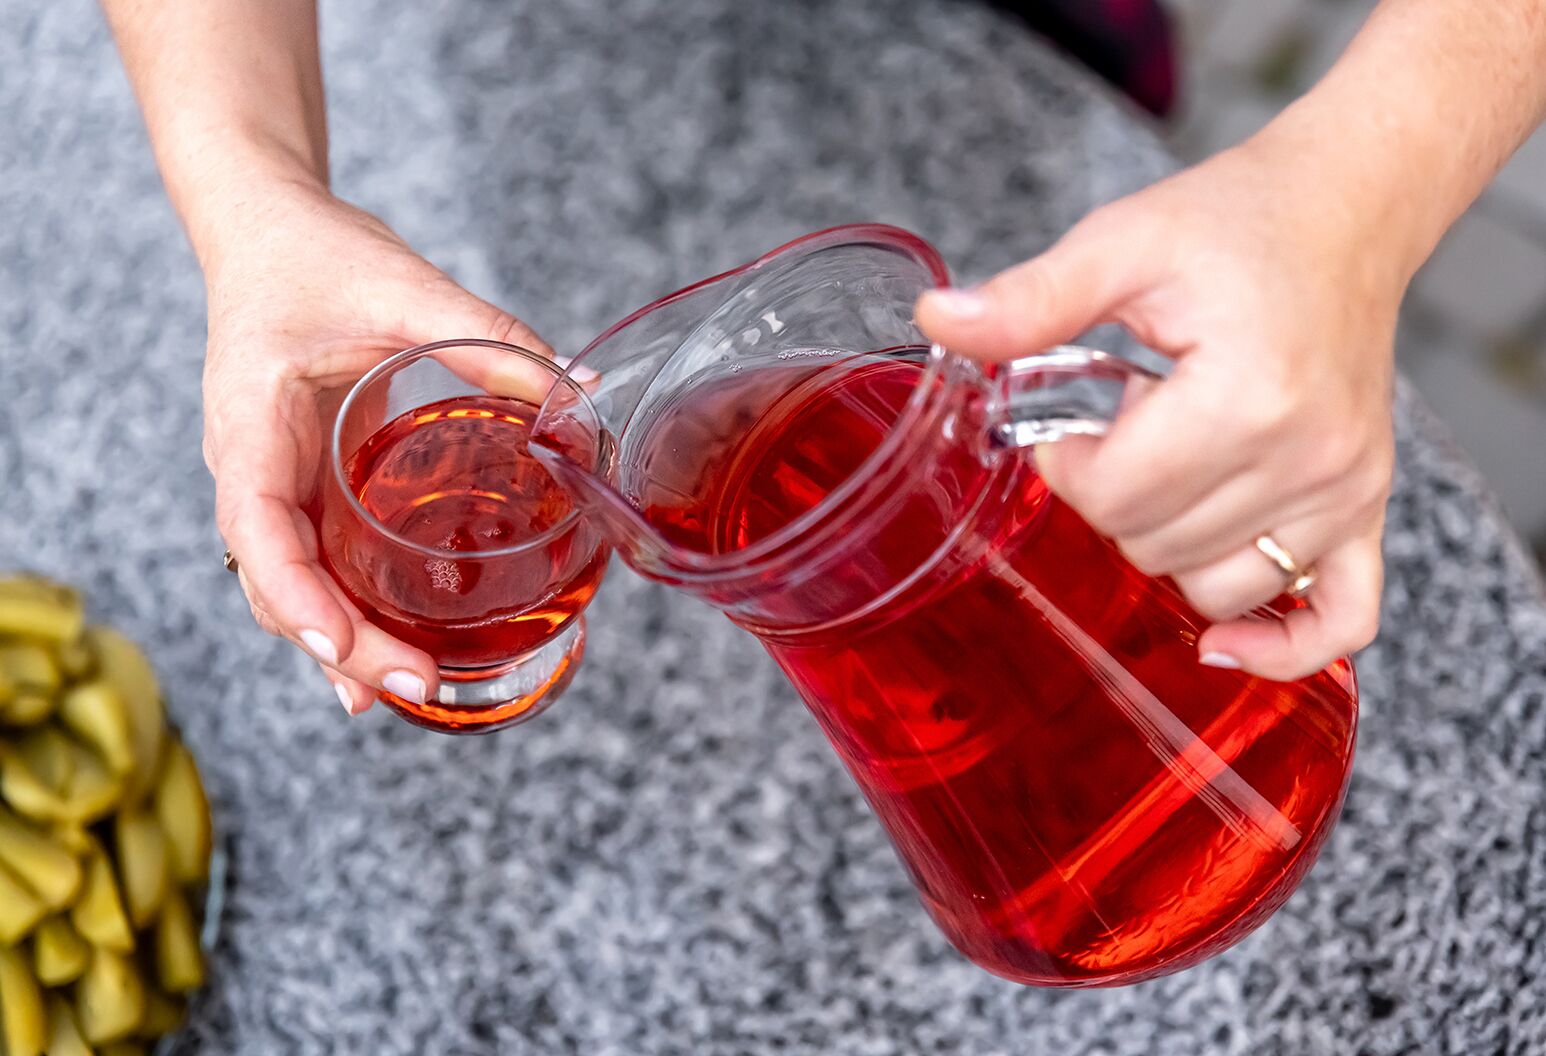 A woman pouring cranberry juice from a glass pitcher into a drinking glass.